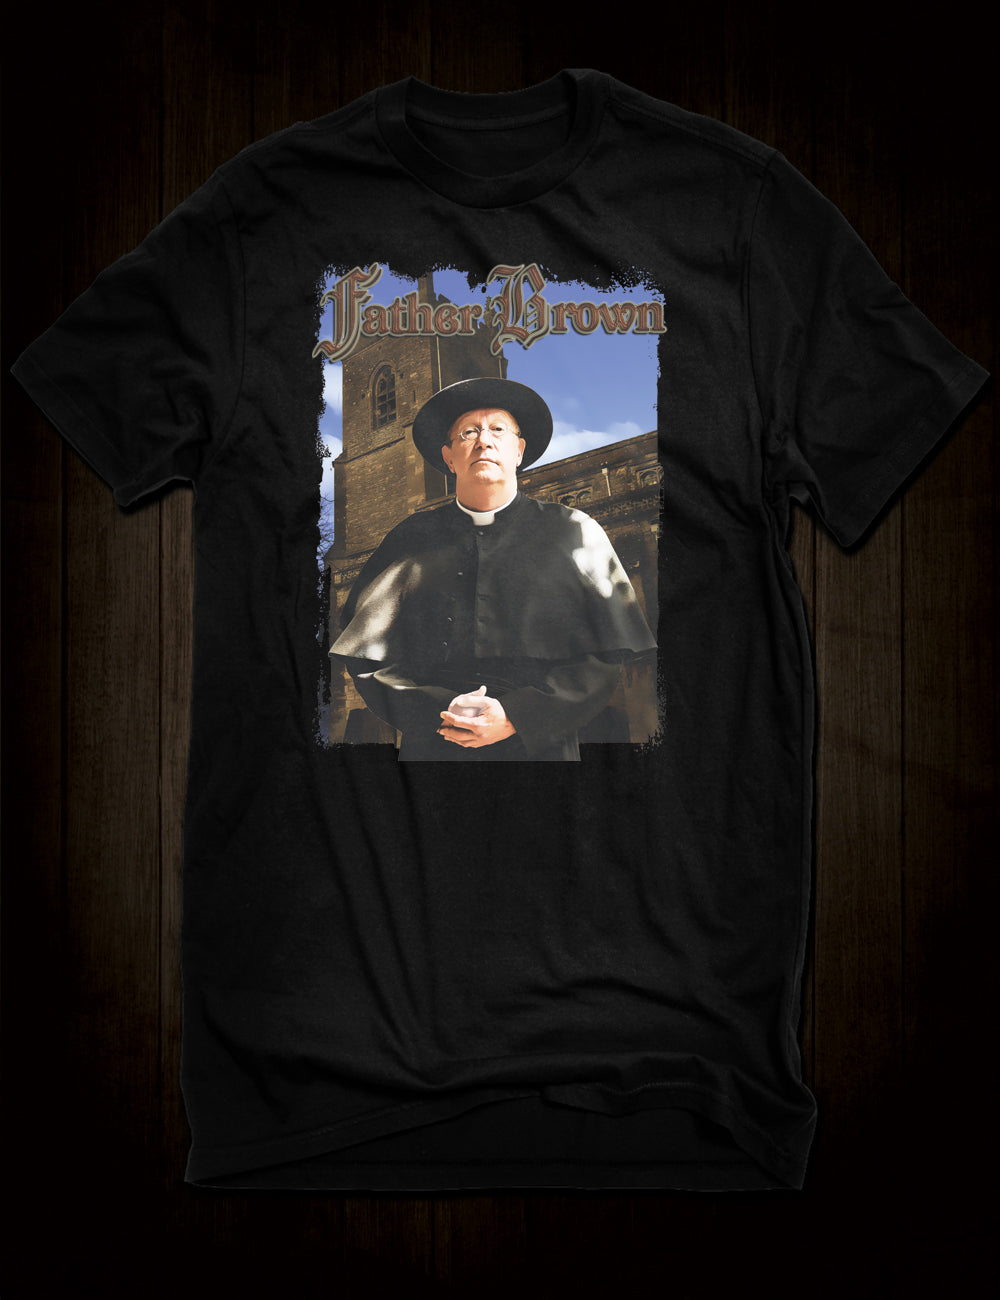 Father Brown T-Shirt